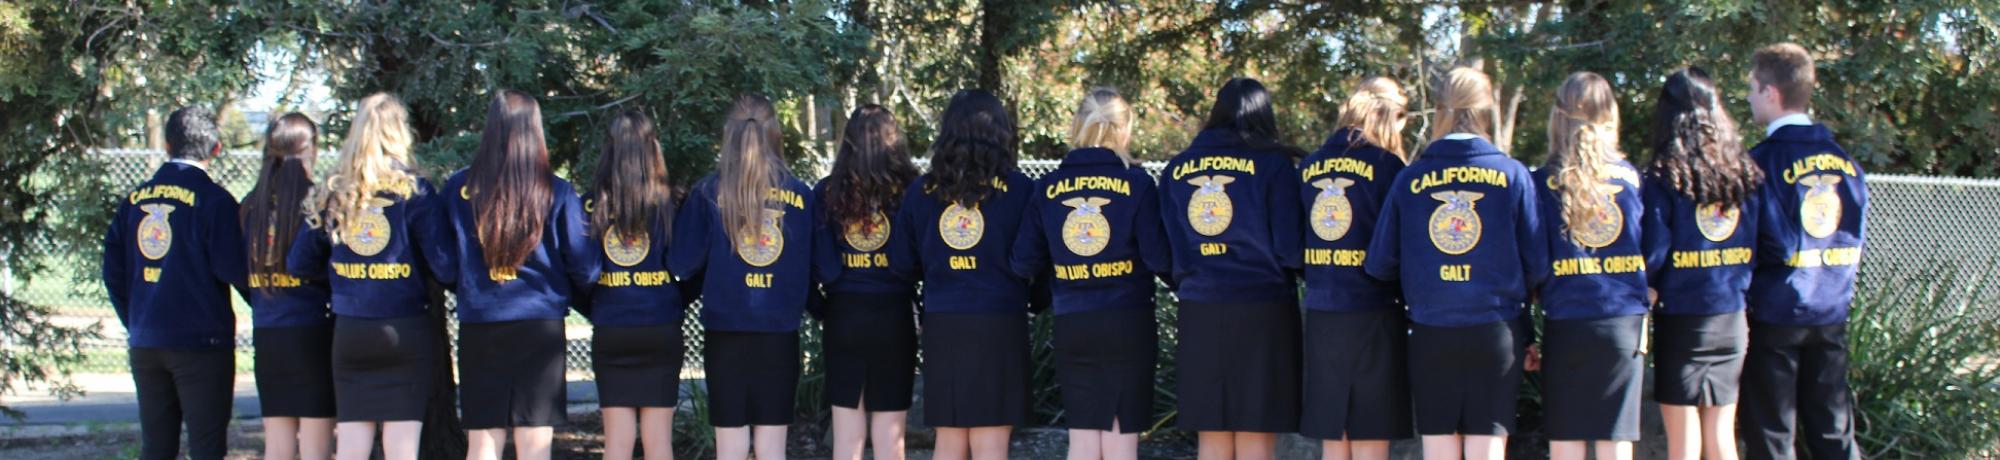 FFA Students in Competition Uniform